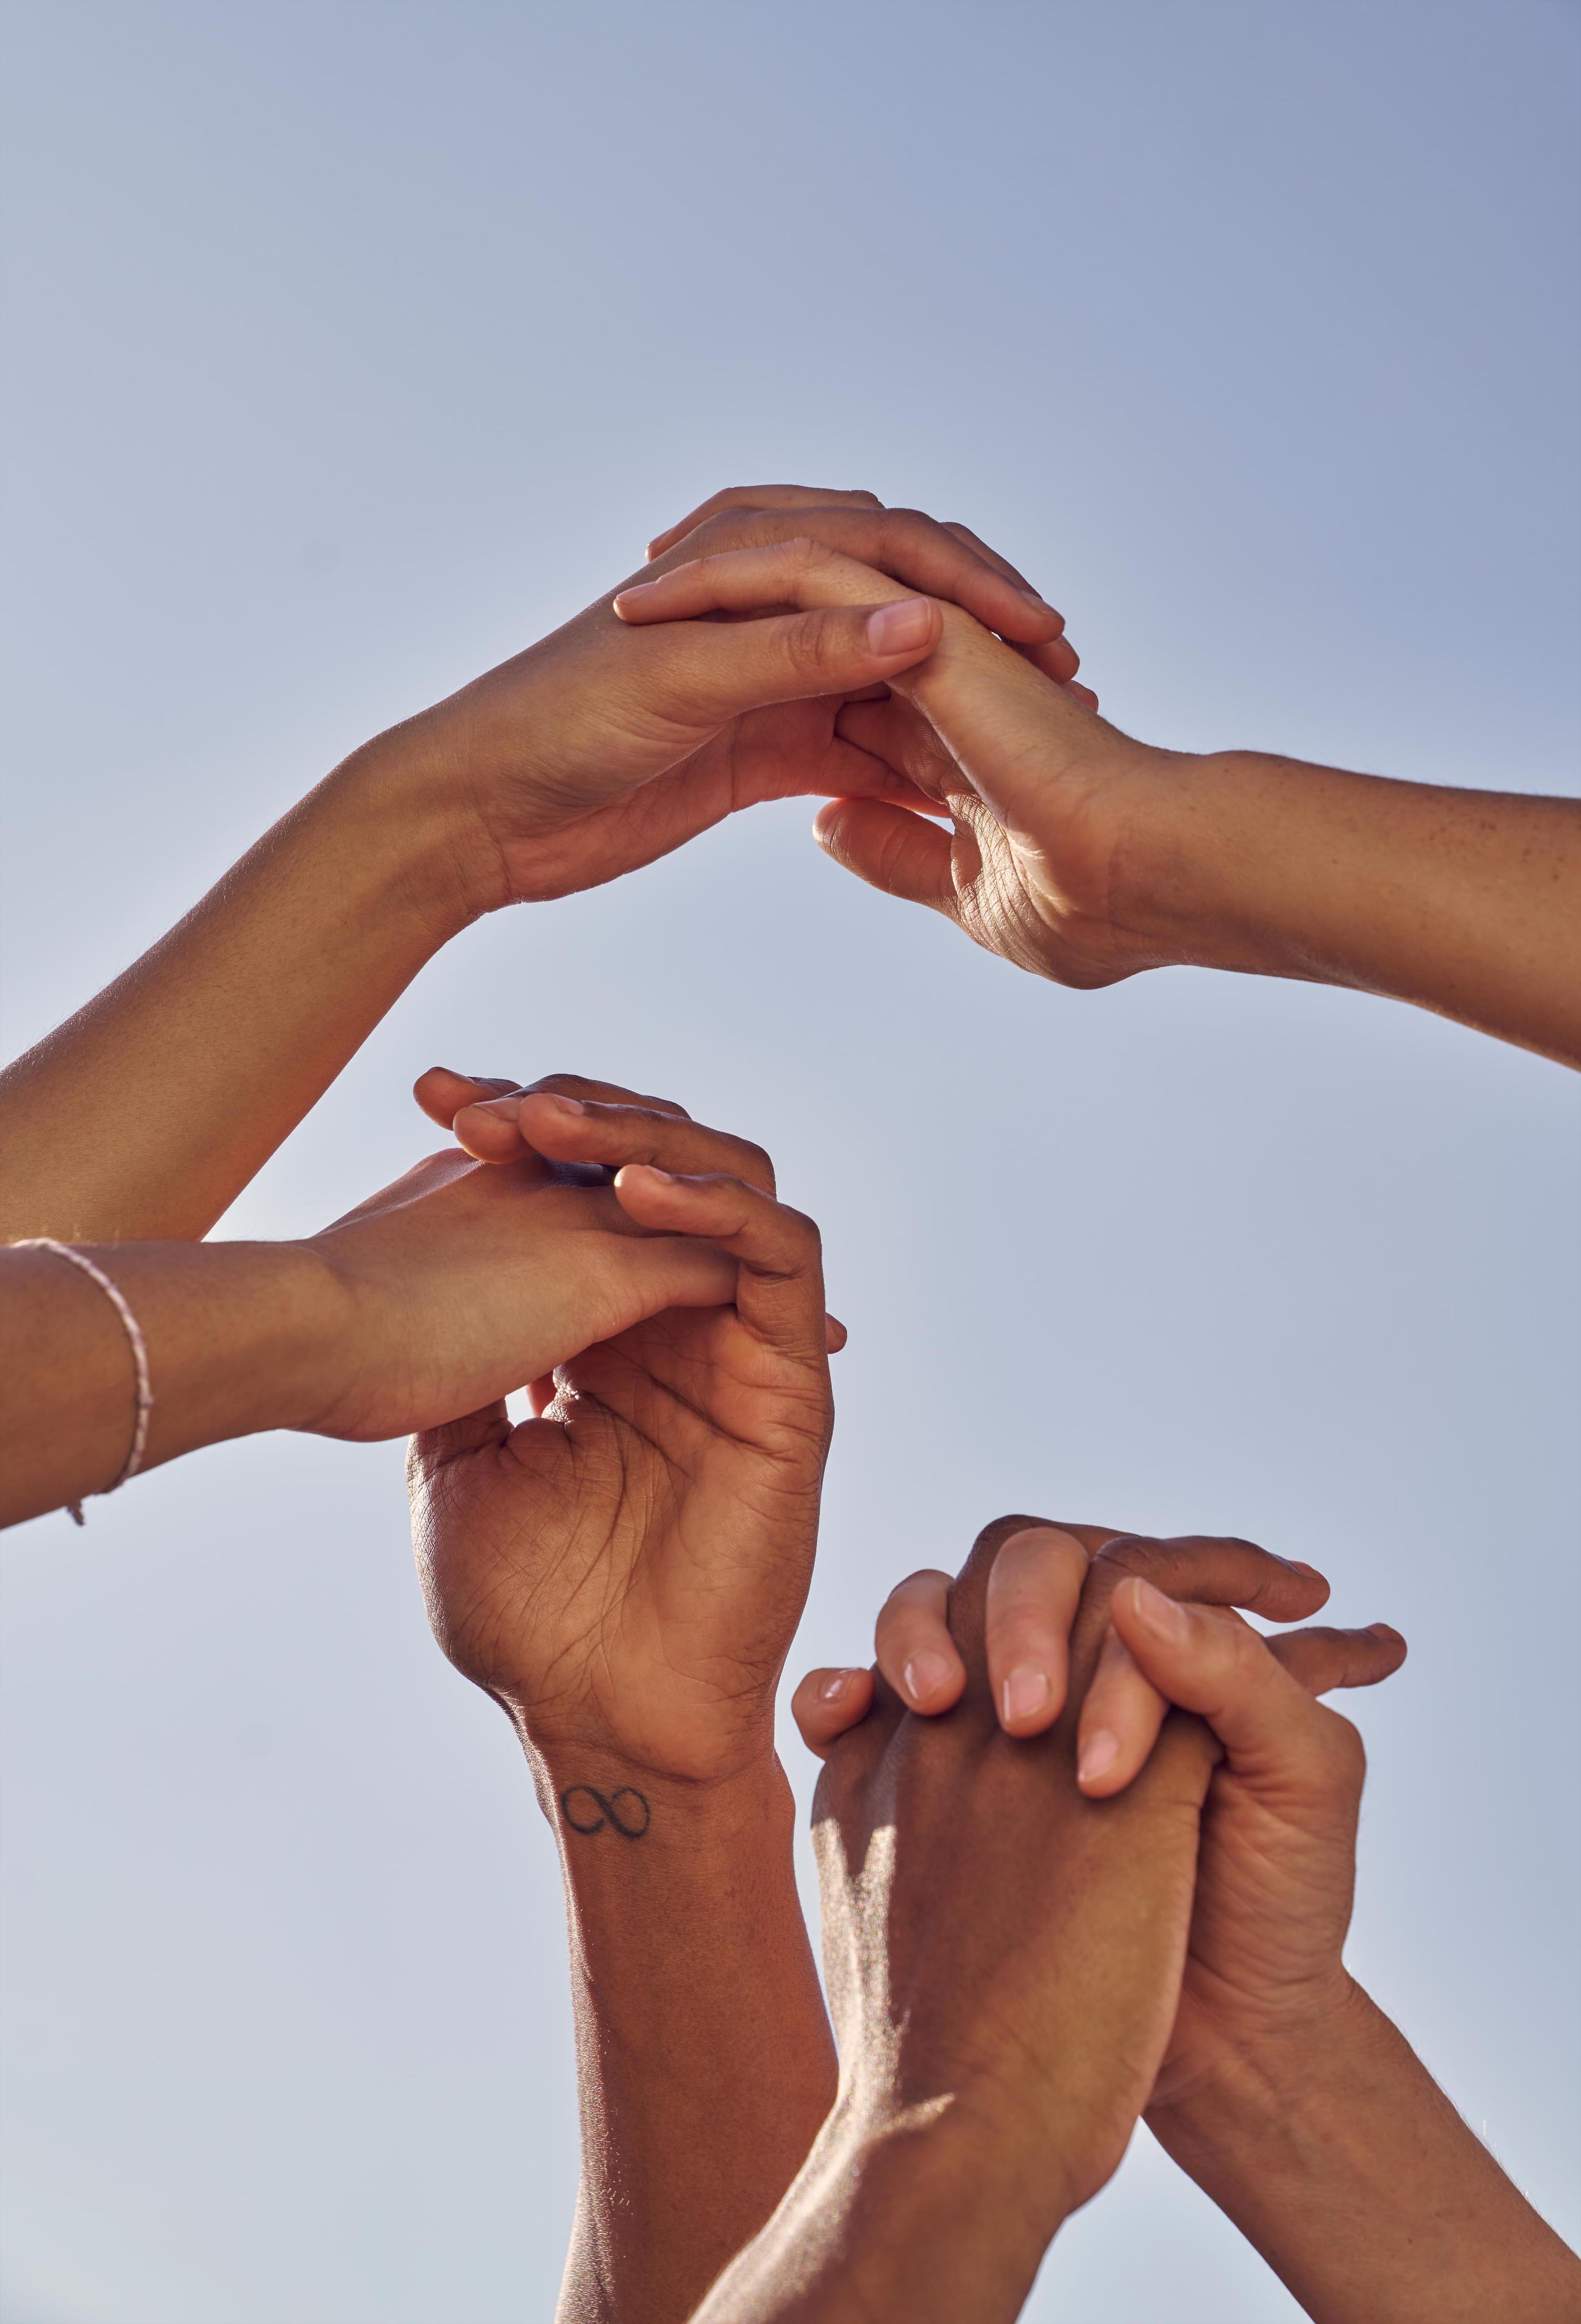 Group of hands interlocked and